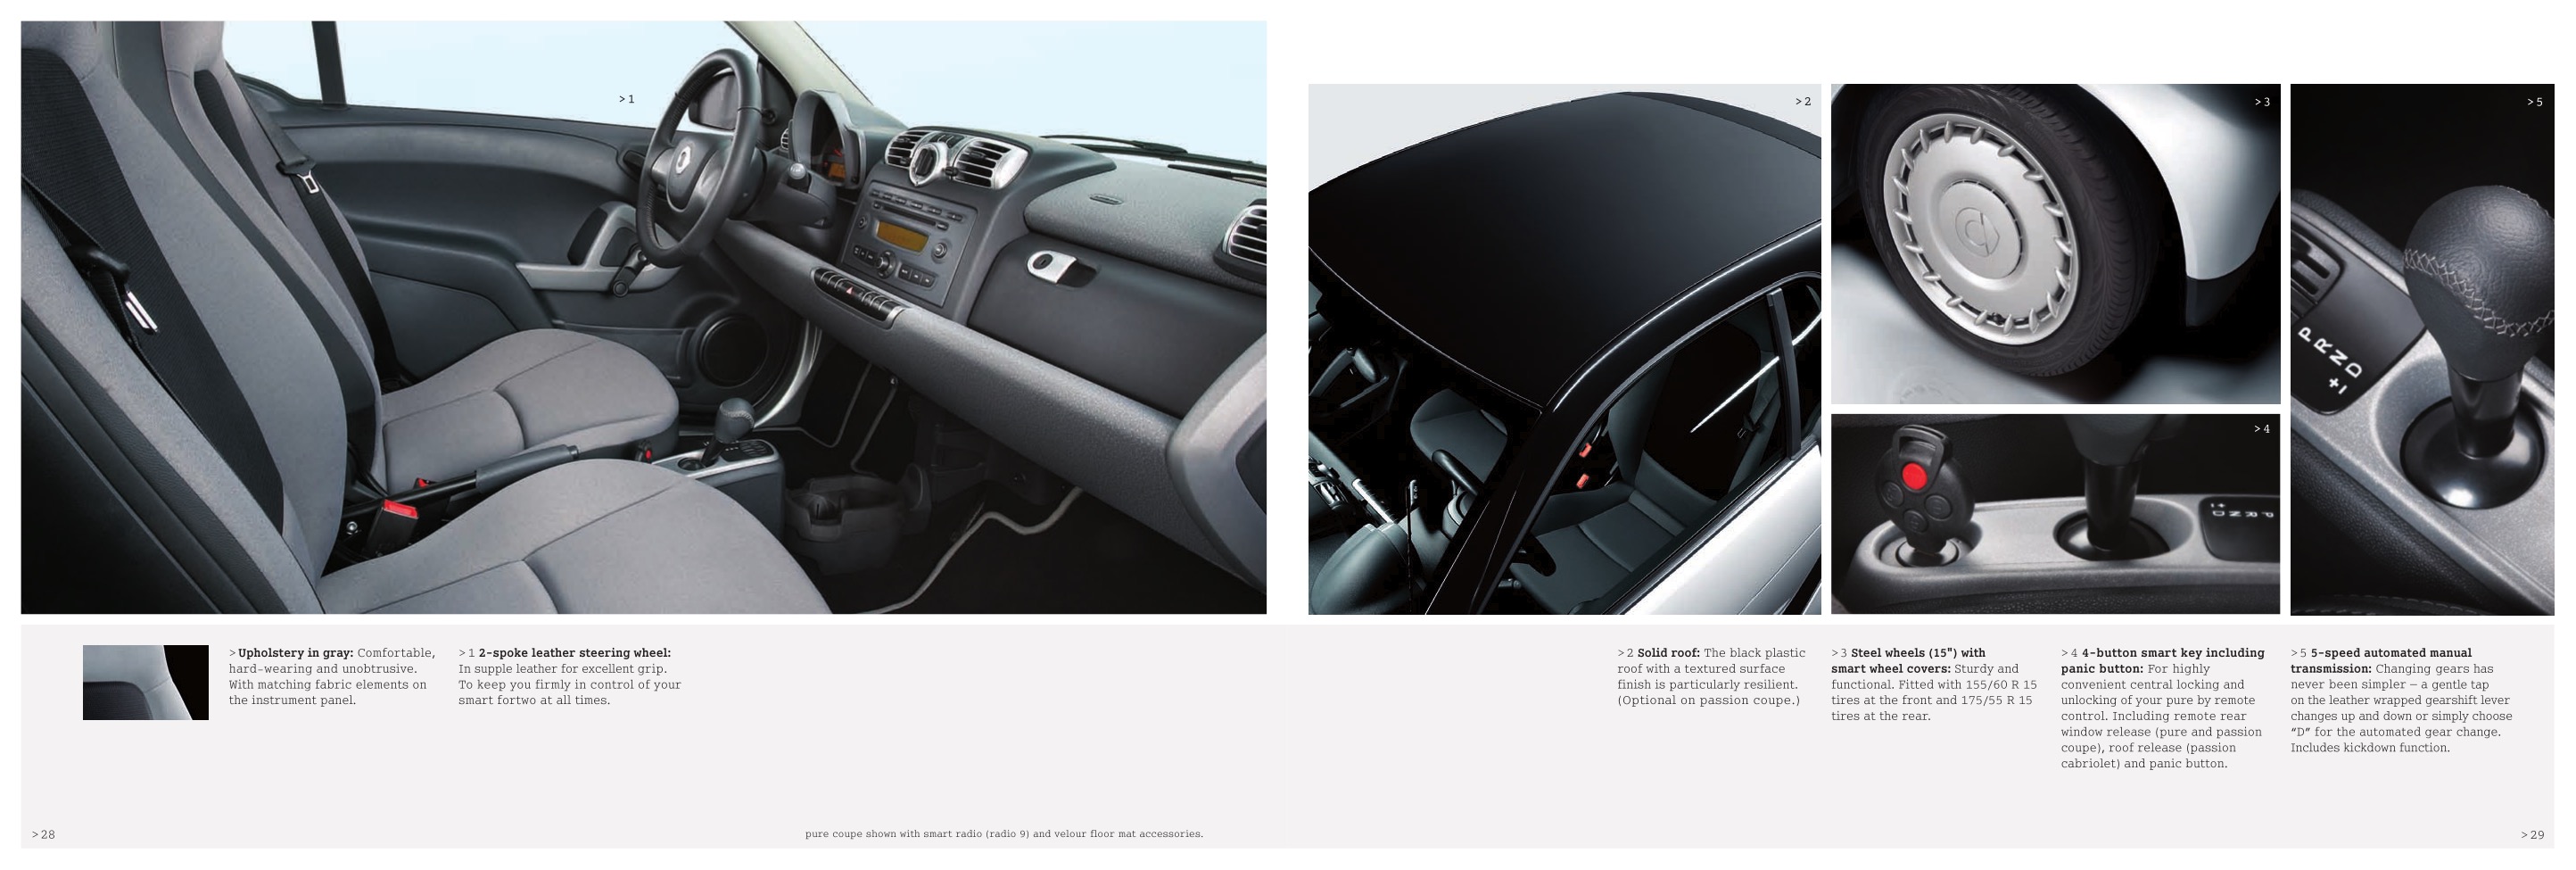 2009 Smart Fortwo Brochure Page 23